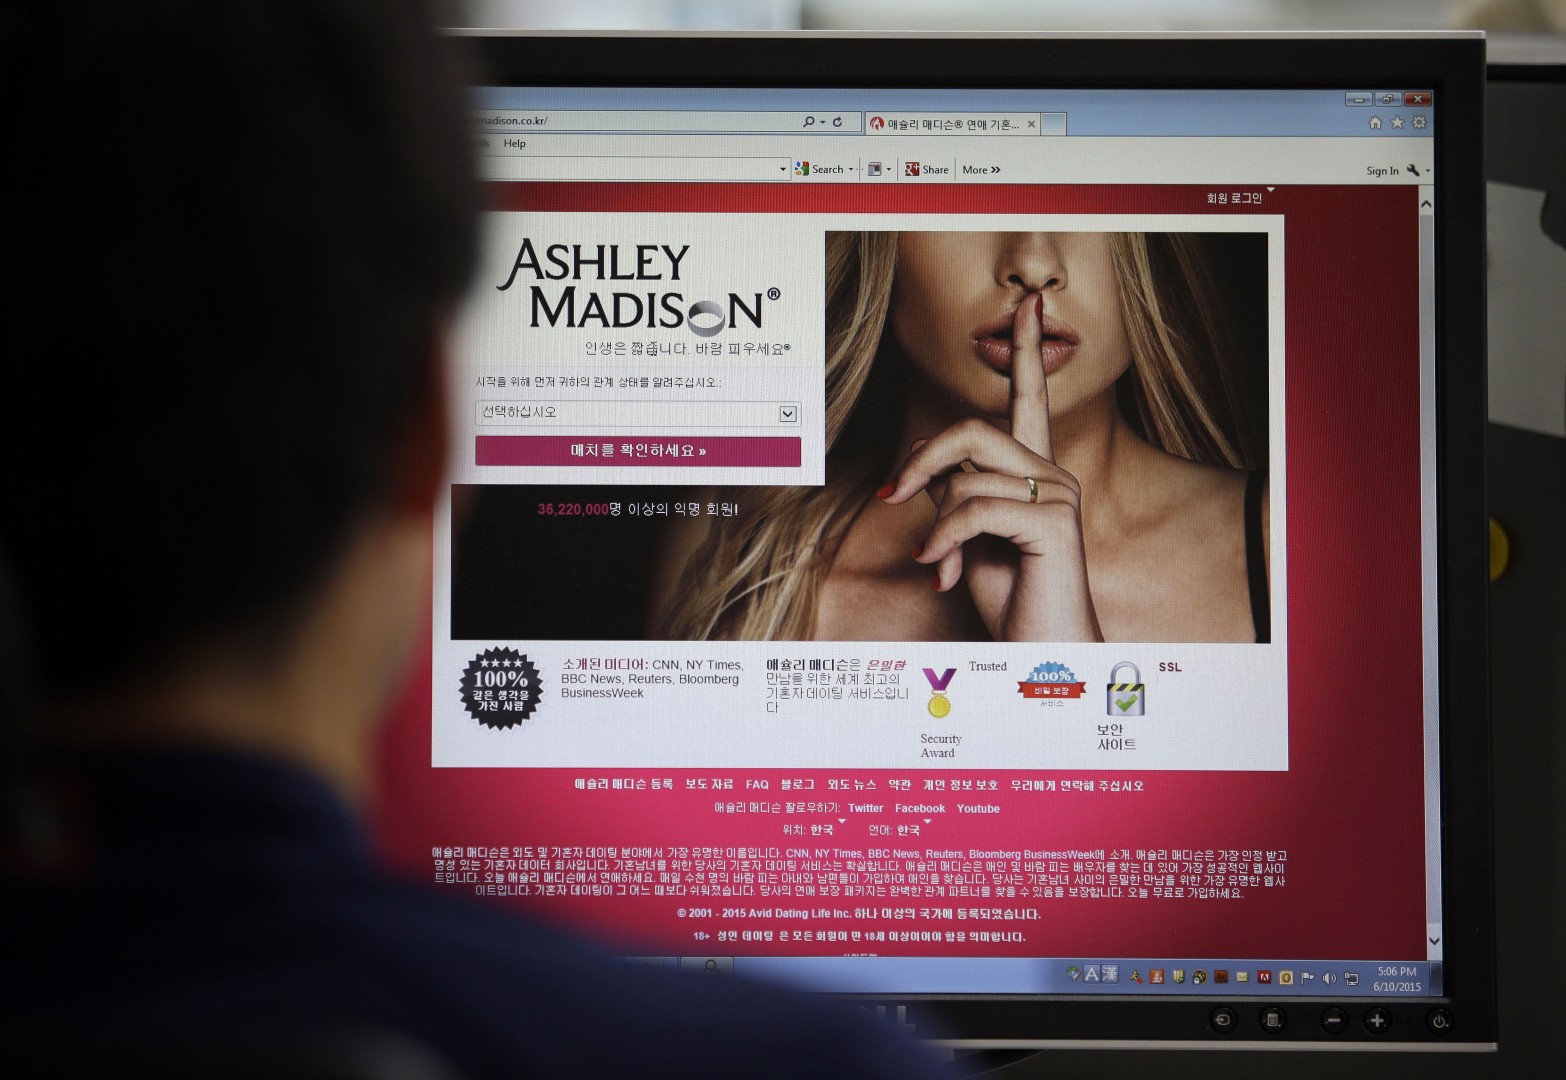 Forget Ashley Madison, the real hack is making us dependent ... - 